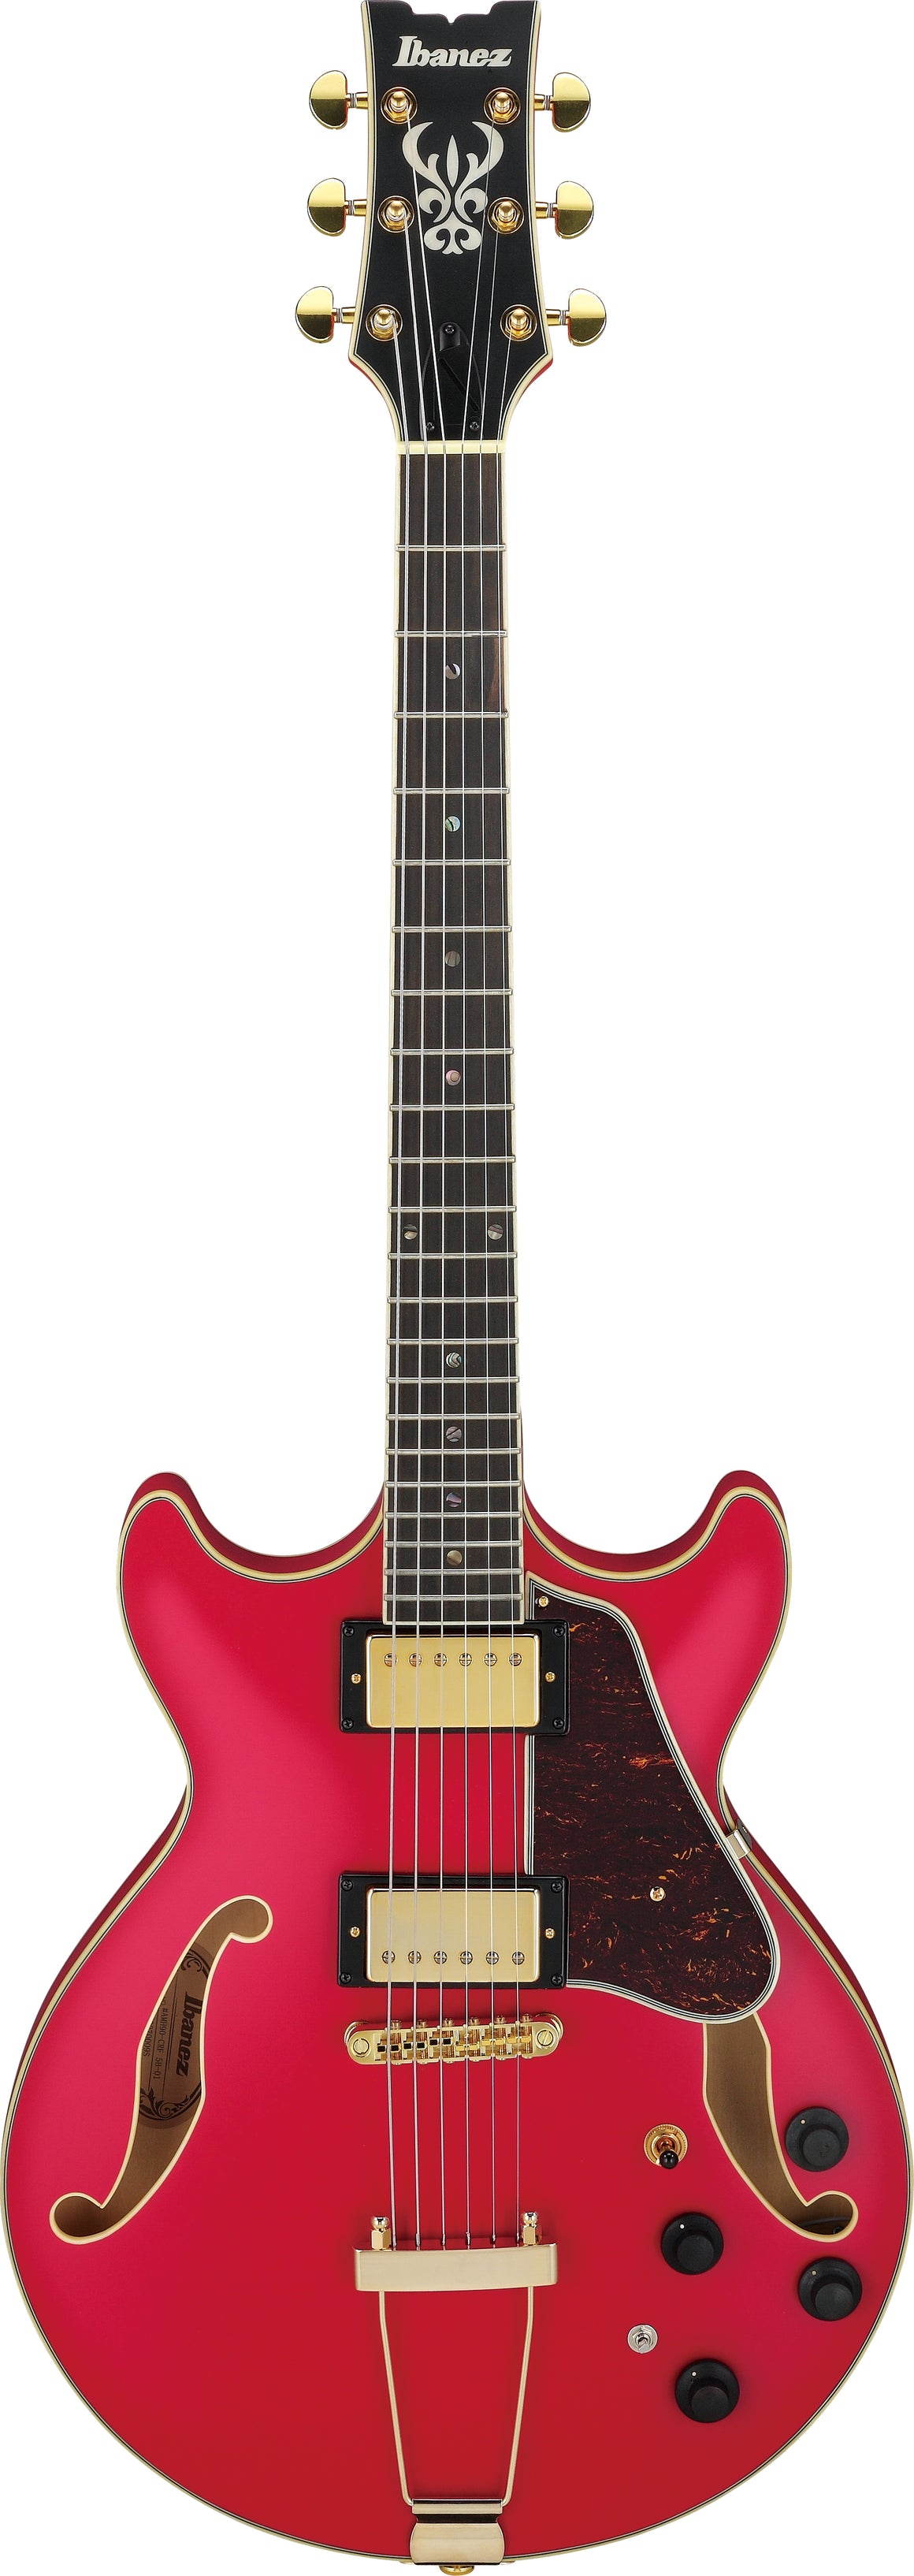 Ibanez AMH90CRF Artcore Expressionist Series Hollowbody Electric Guitar (Cherry Red Flat)